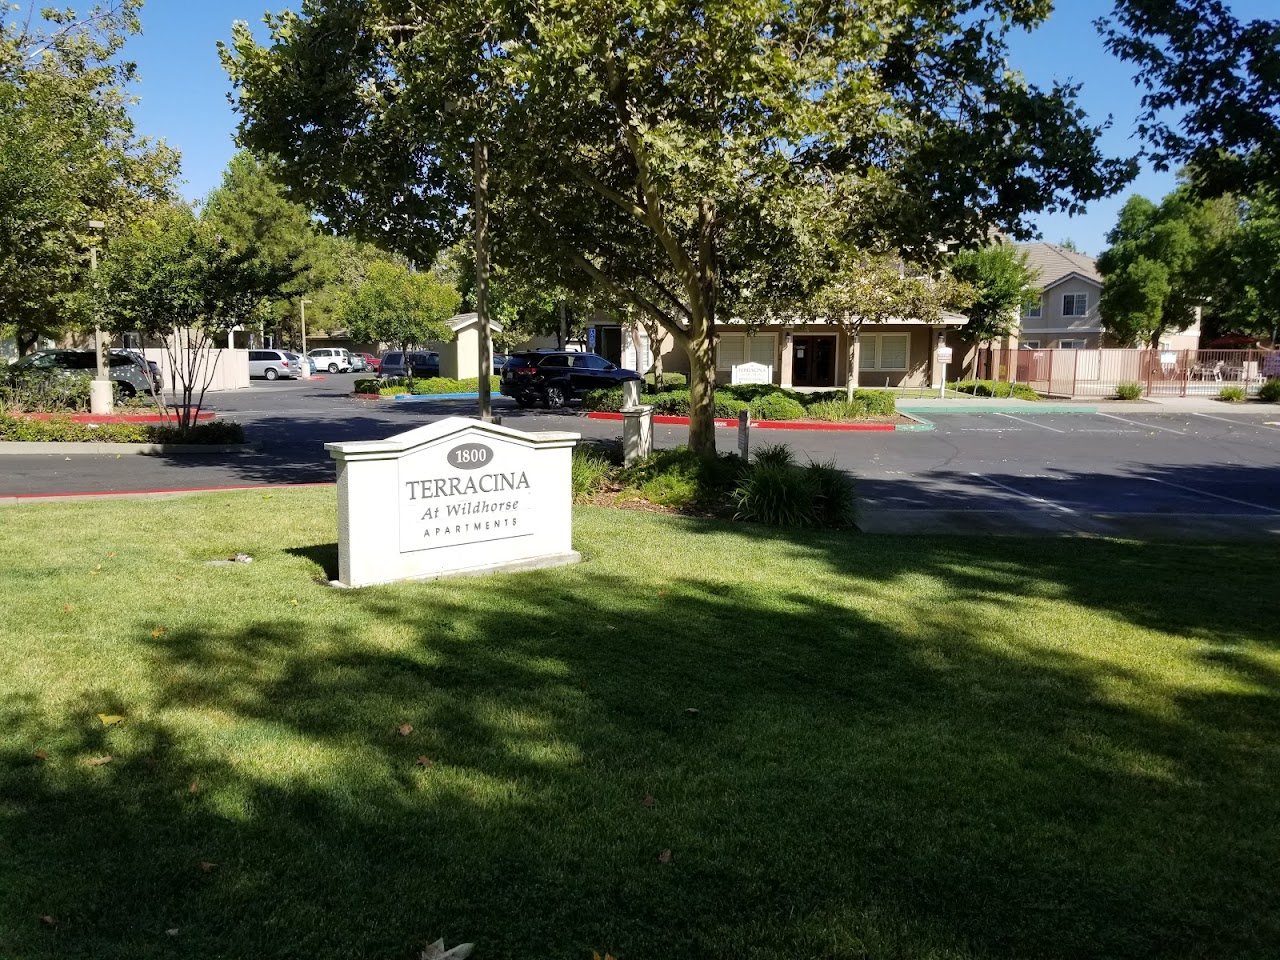 Photo of TERRACINA AT WILDHORSE. Affordable housing located at 1800 MOORE BLVD DAVIS, CA 95618